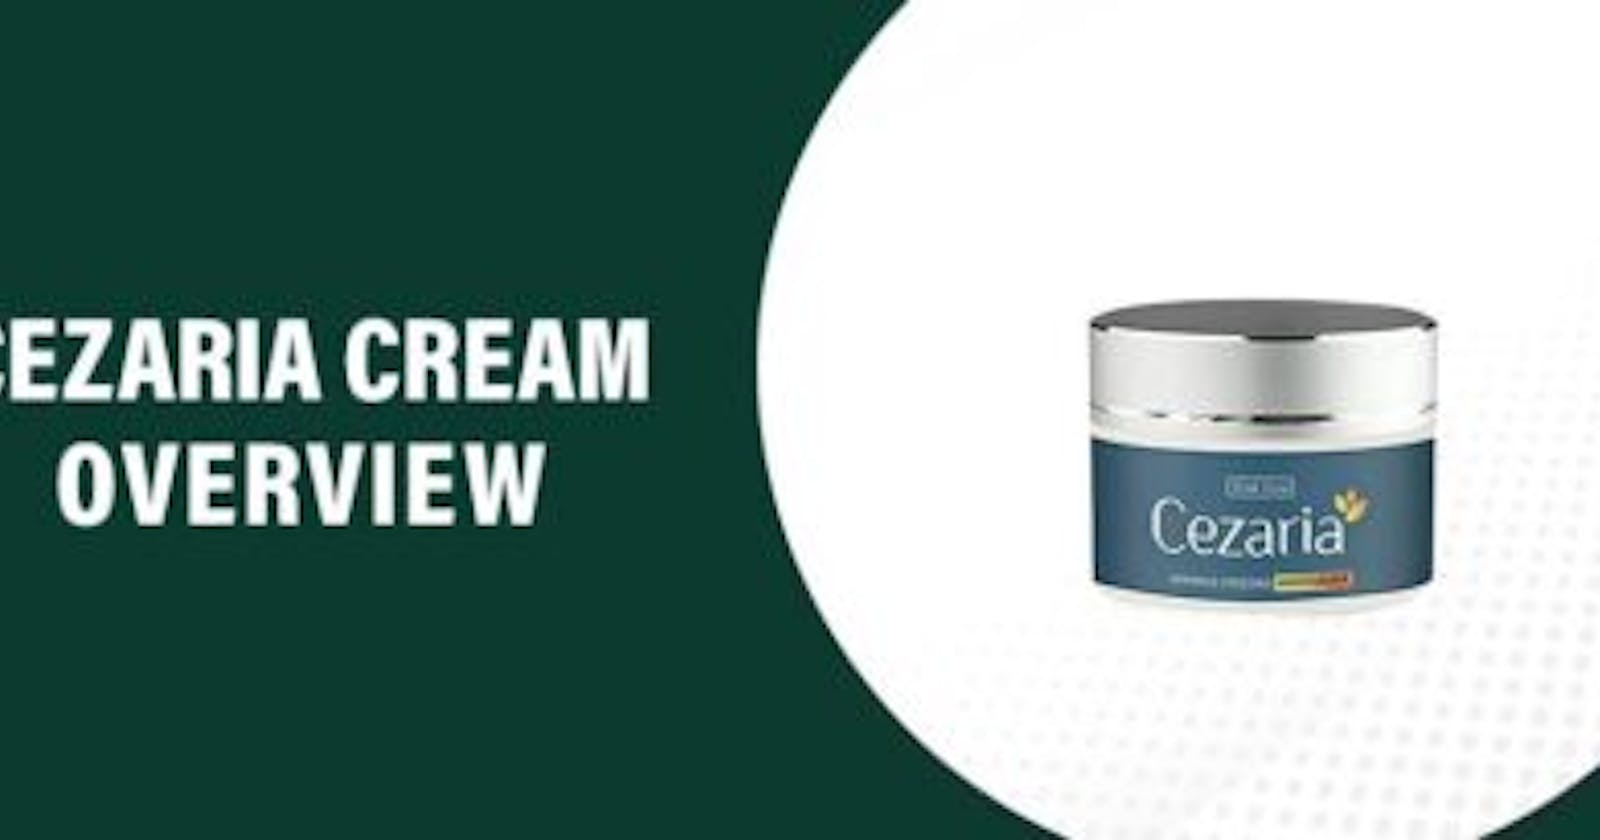 Cezaria Beauty Cream : Myths And Facts Revealed!